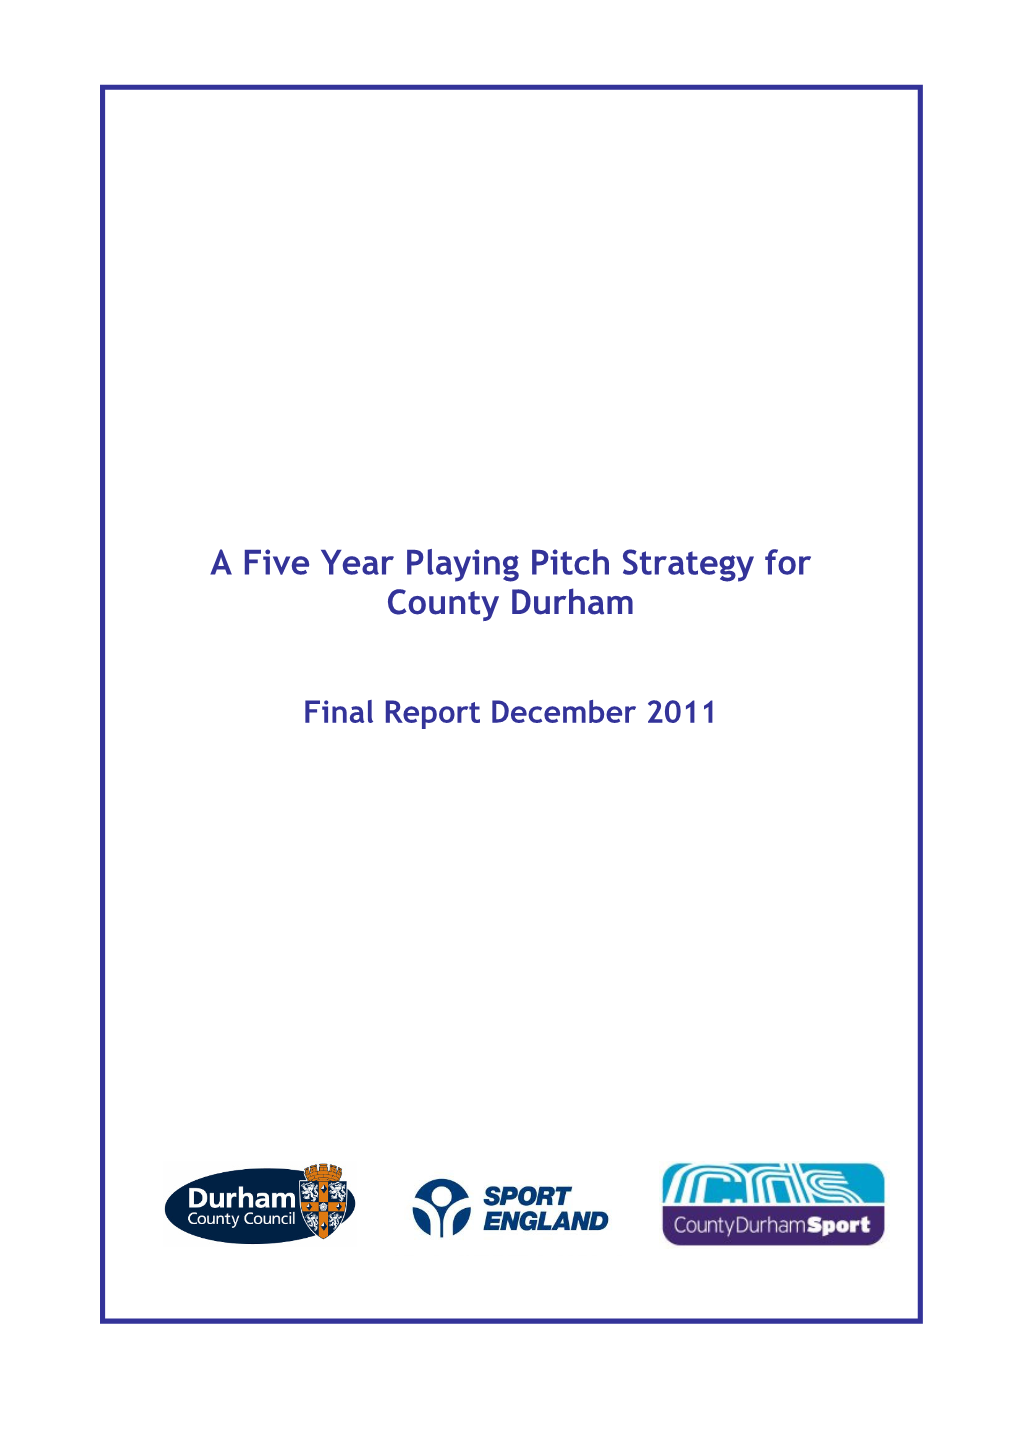 A Five Year Playing Pitch Strategy for County Durham